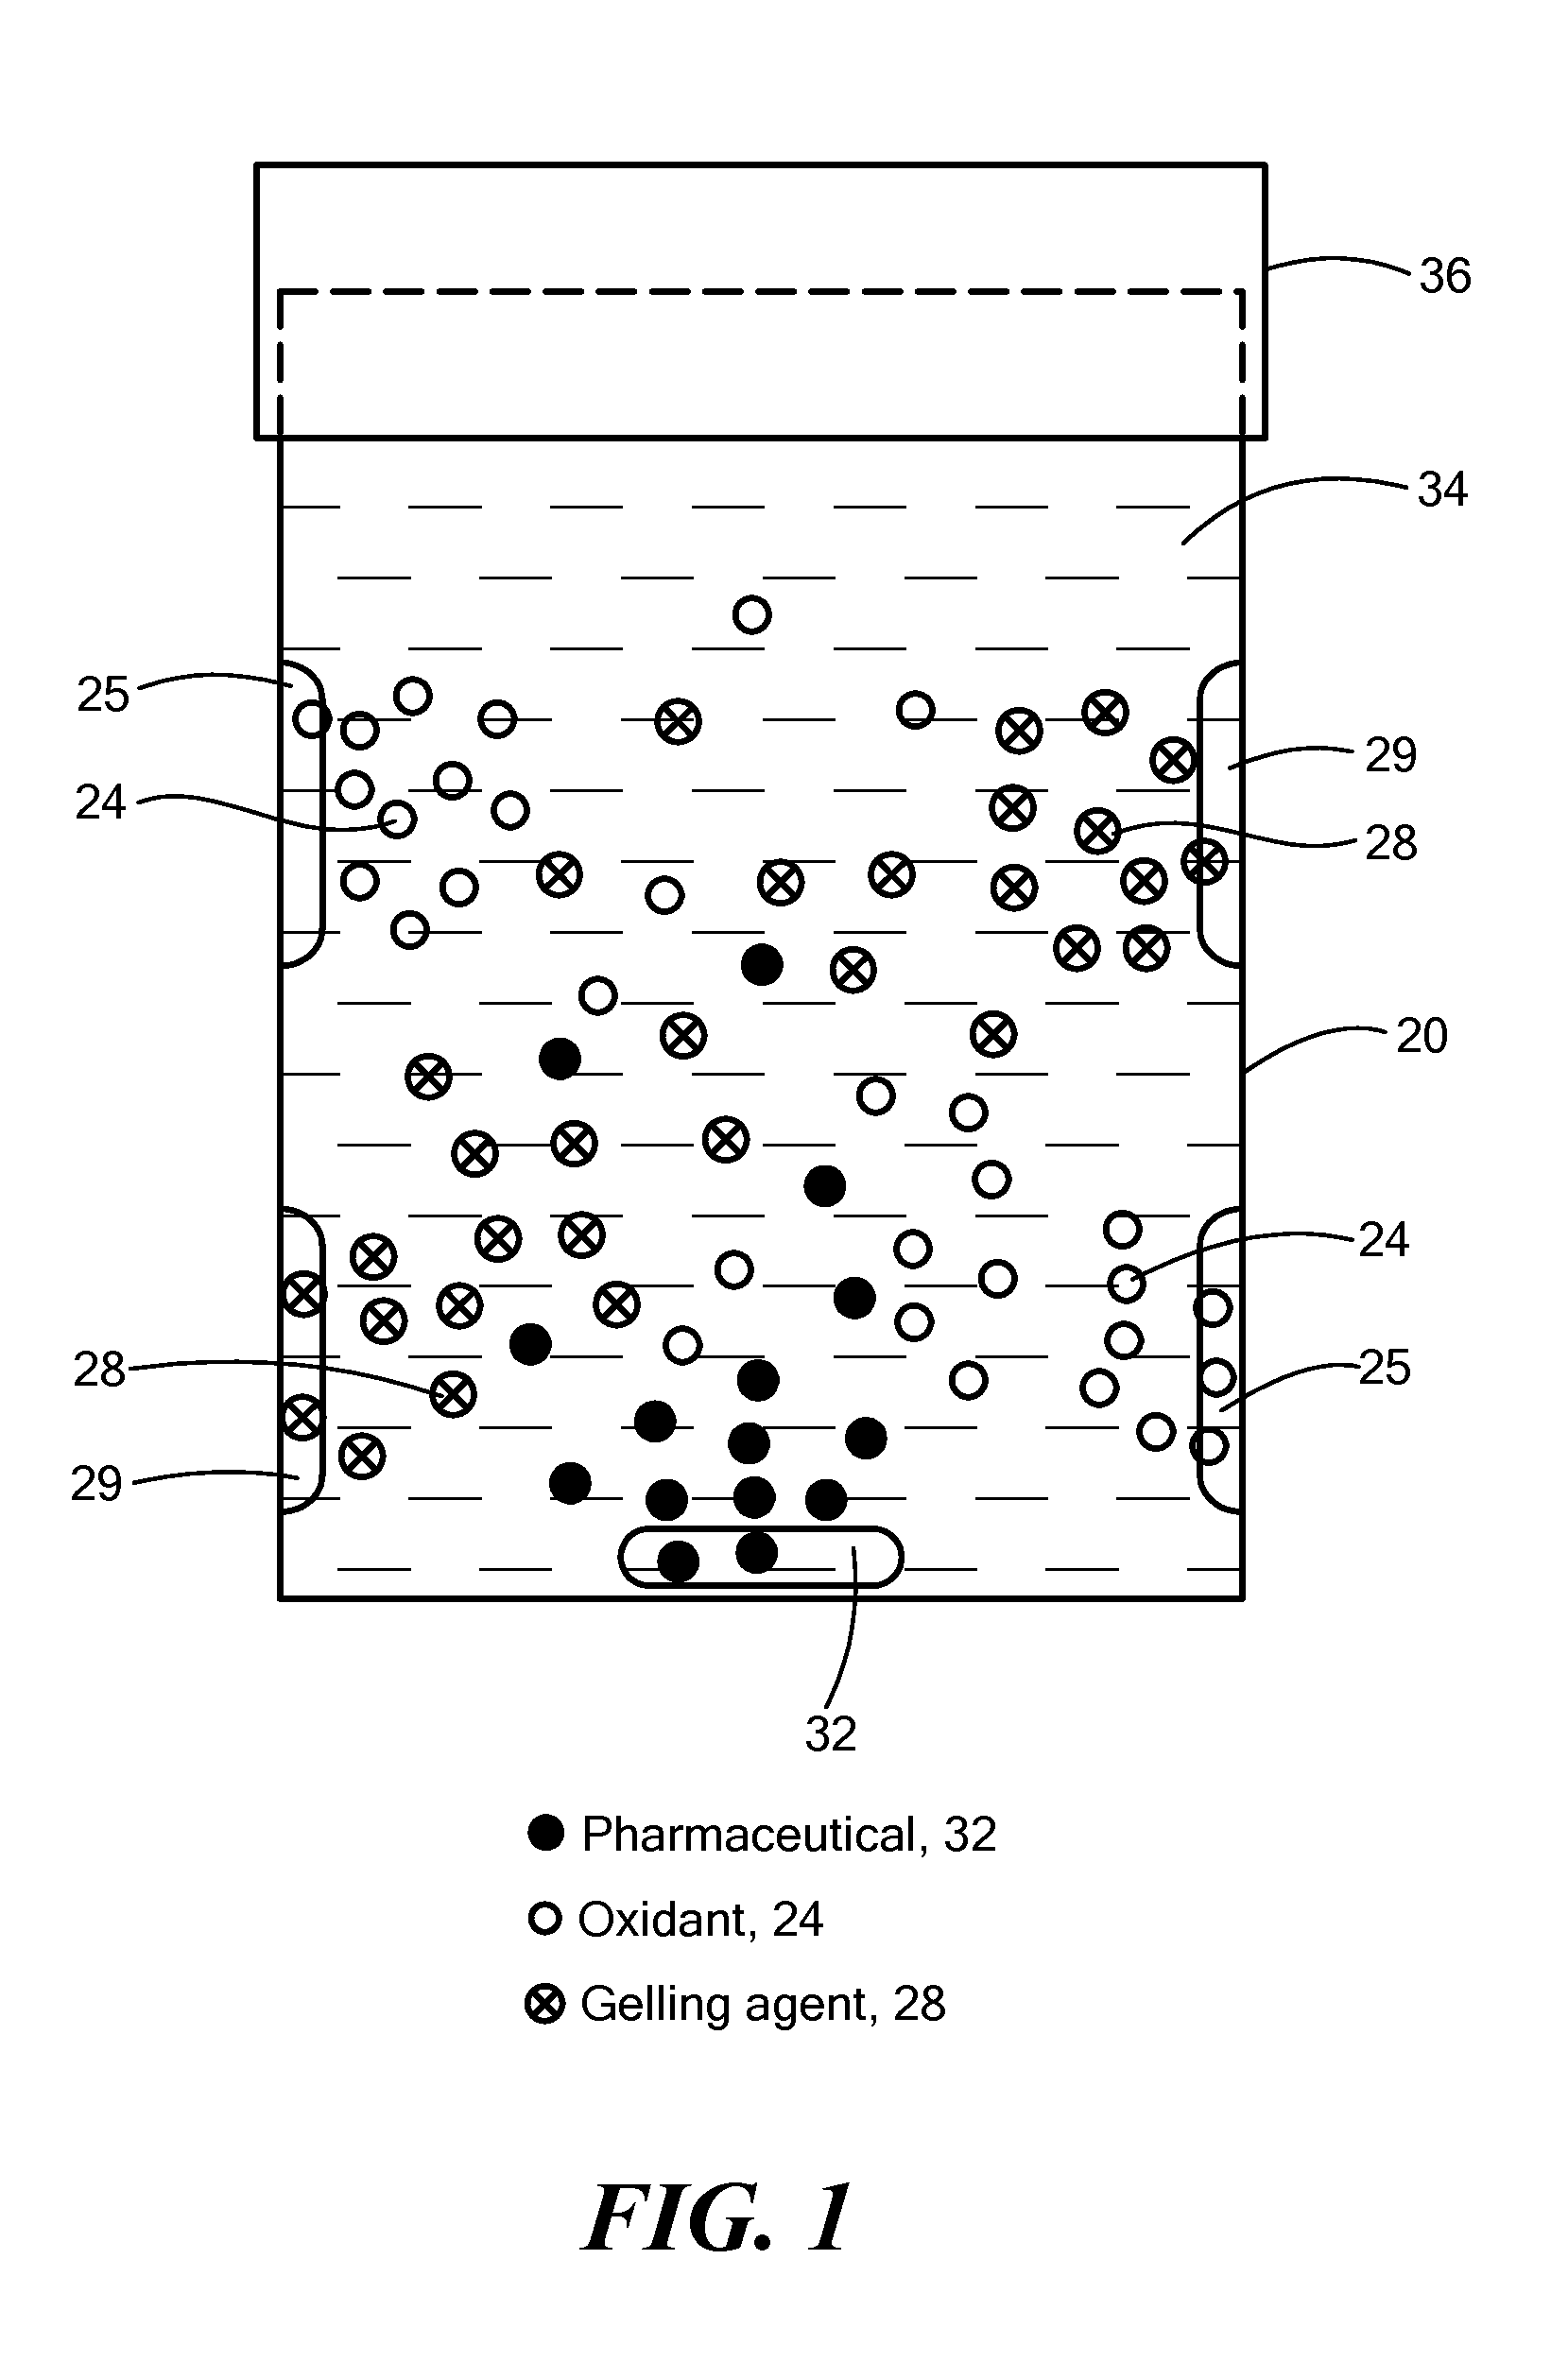 System and Method for Deactivation and Disposal of a Pharmaceutical Dosage Form